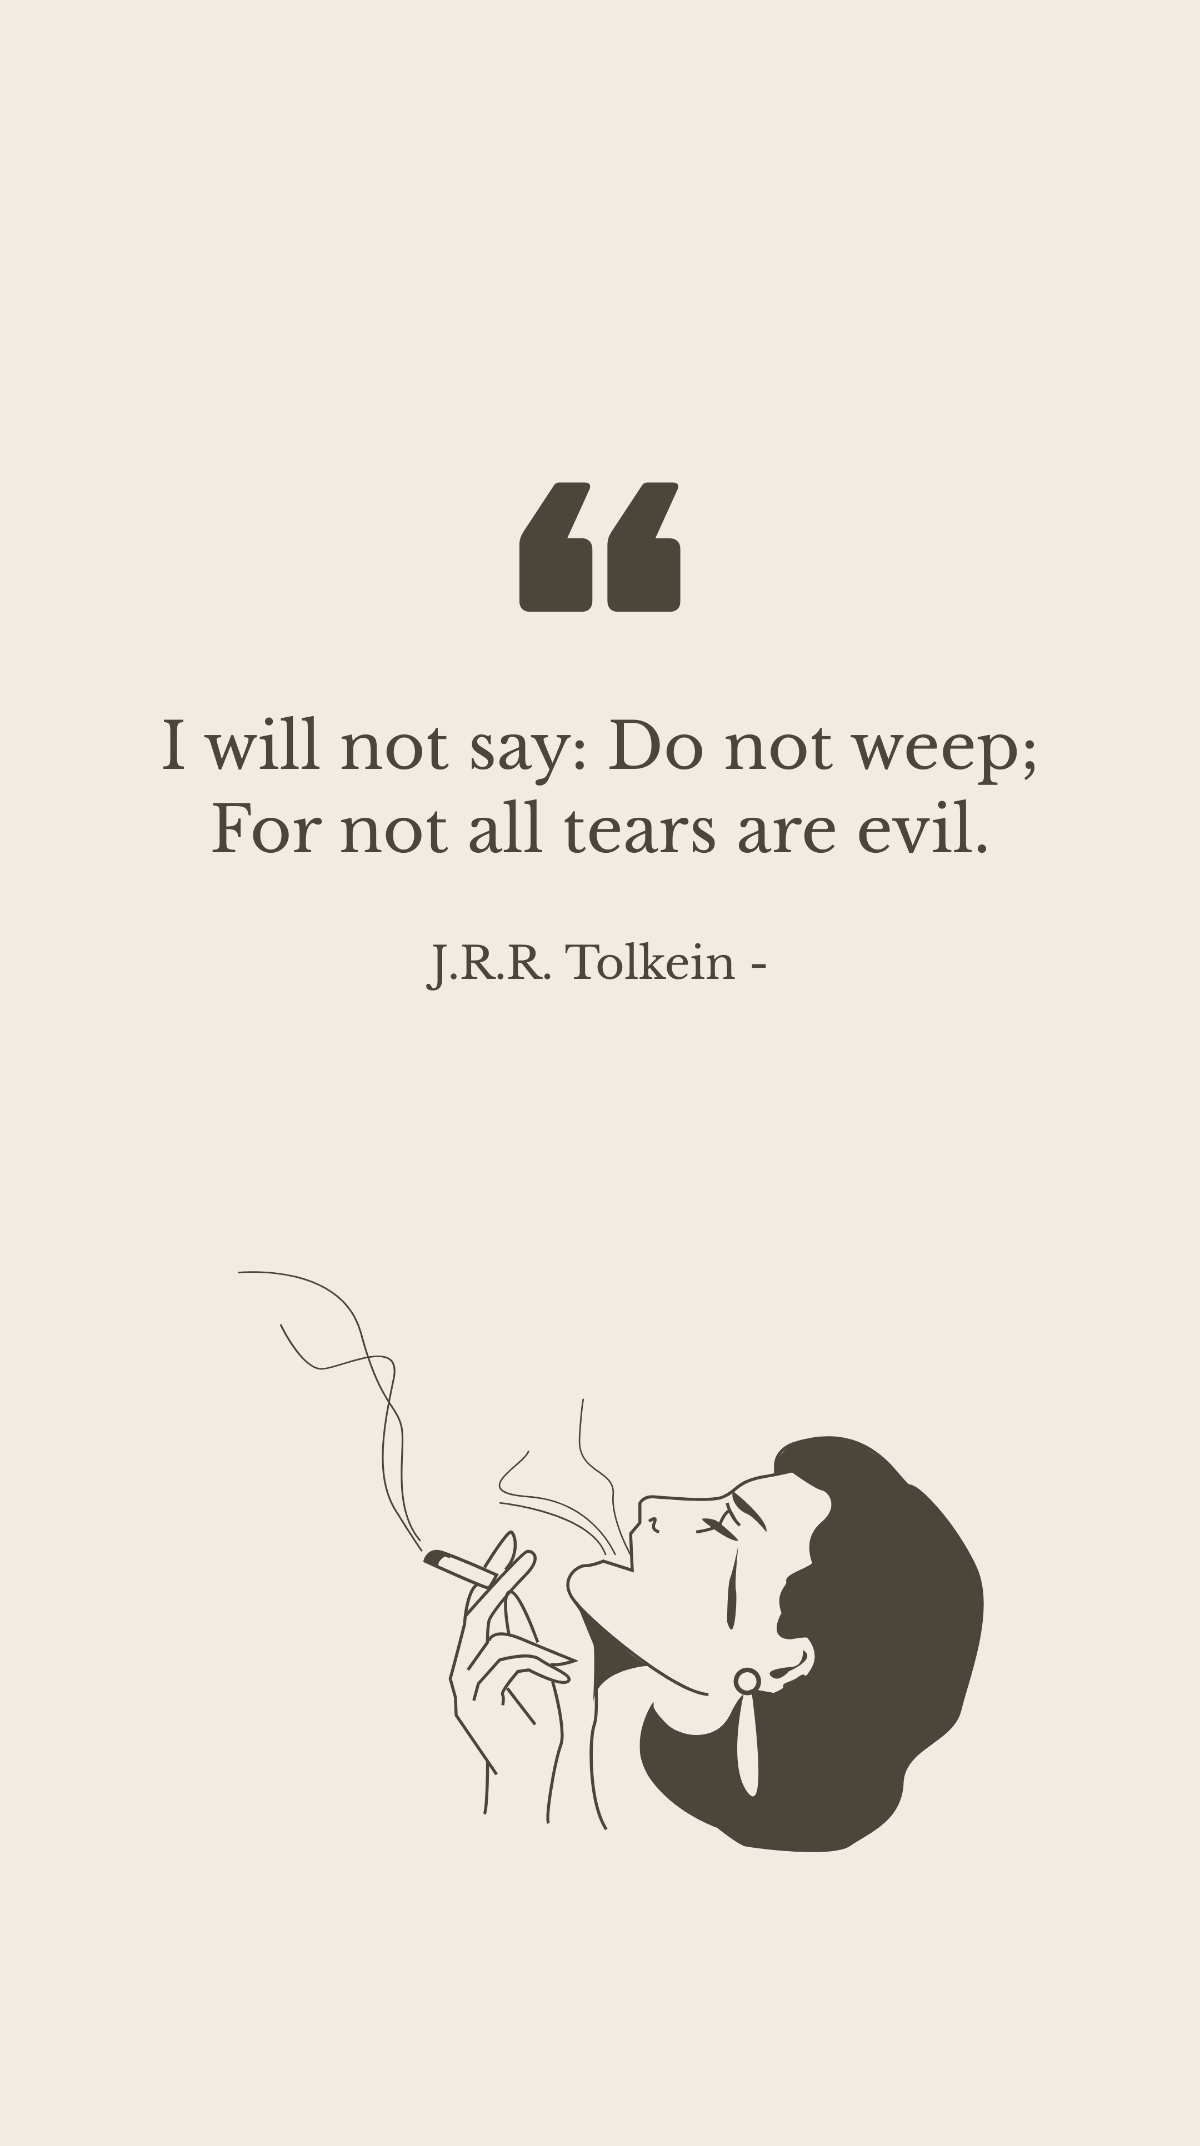 J.R.R. Tolkein - I will not say: Do not weep; For not all tears are evil. Template